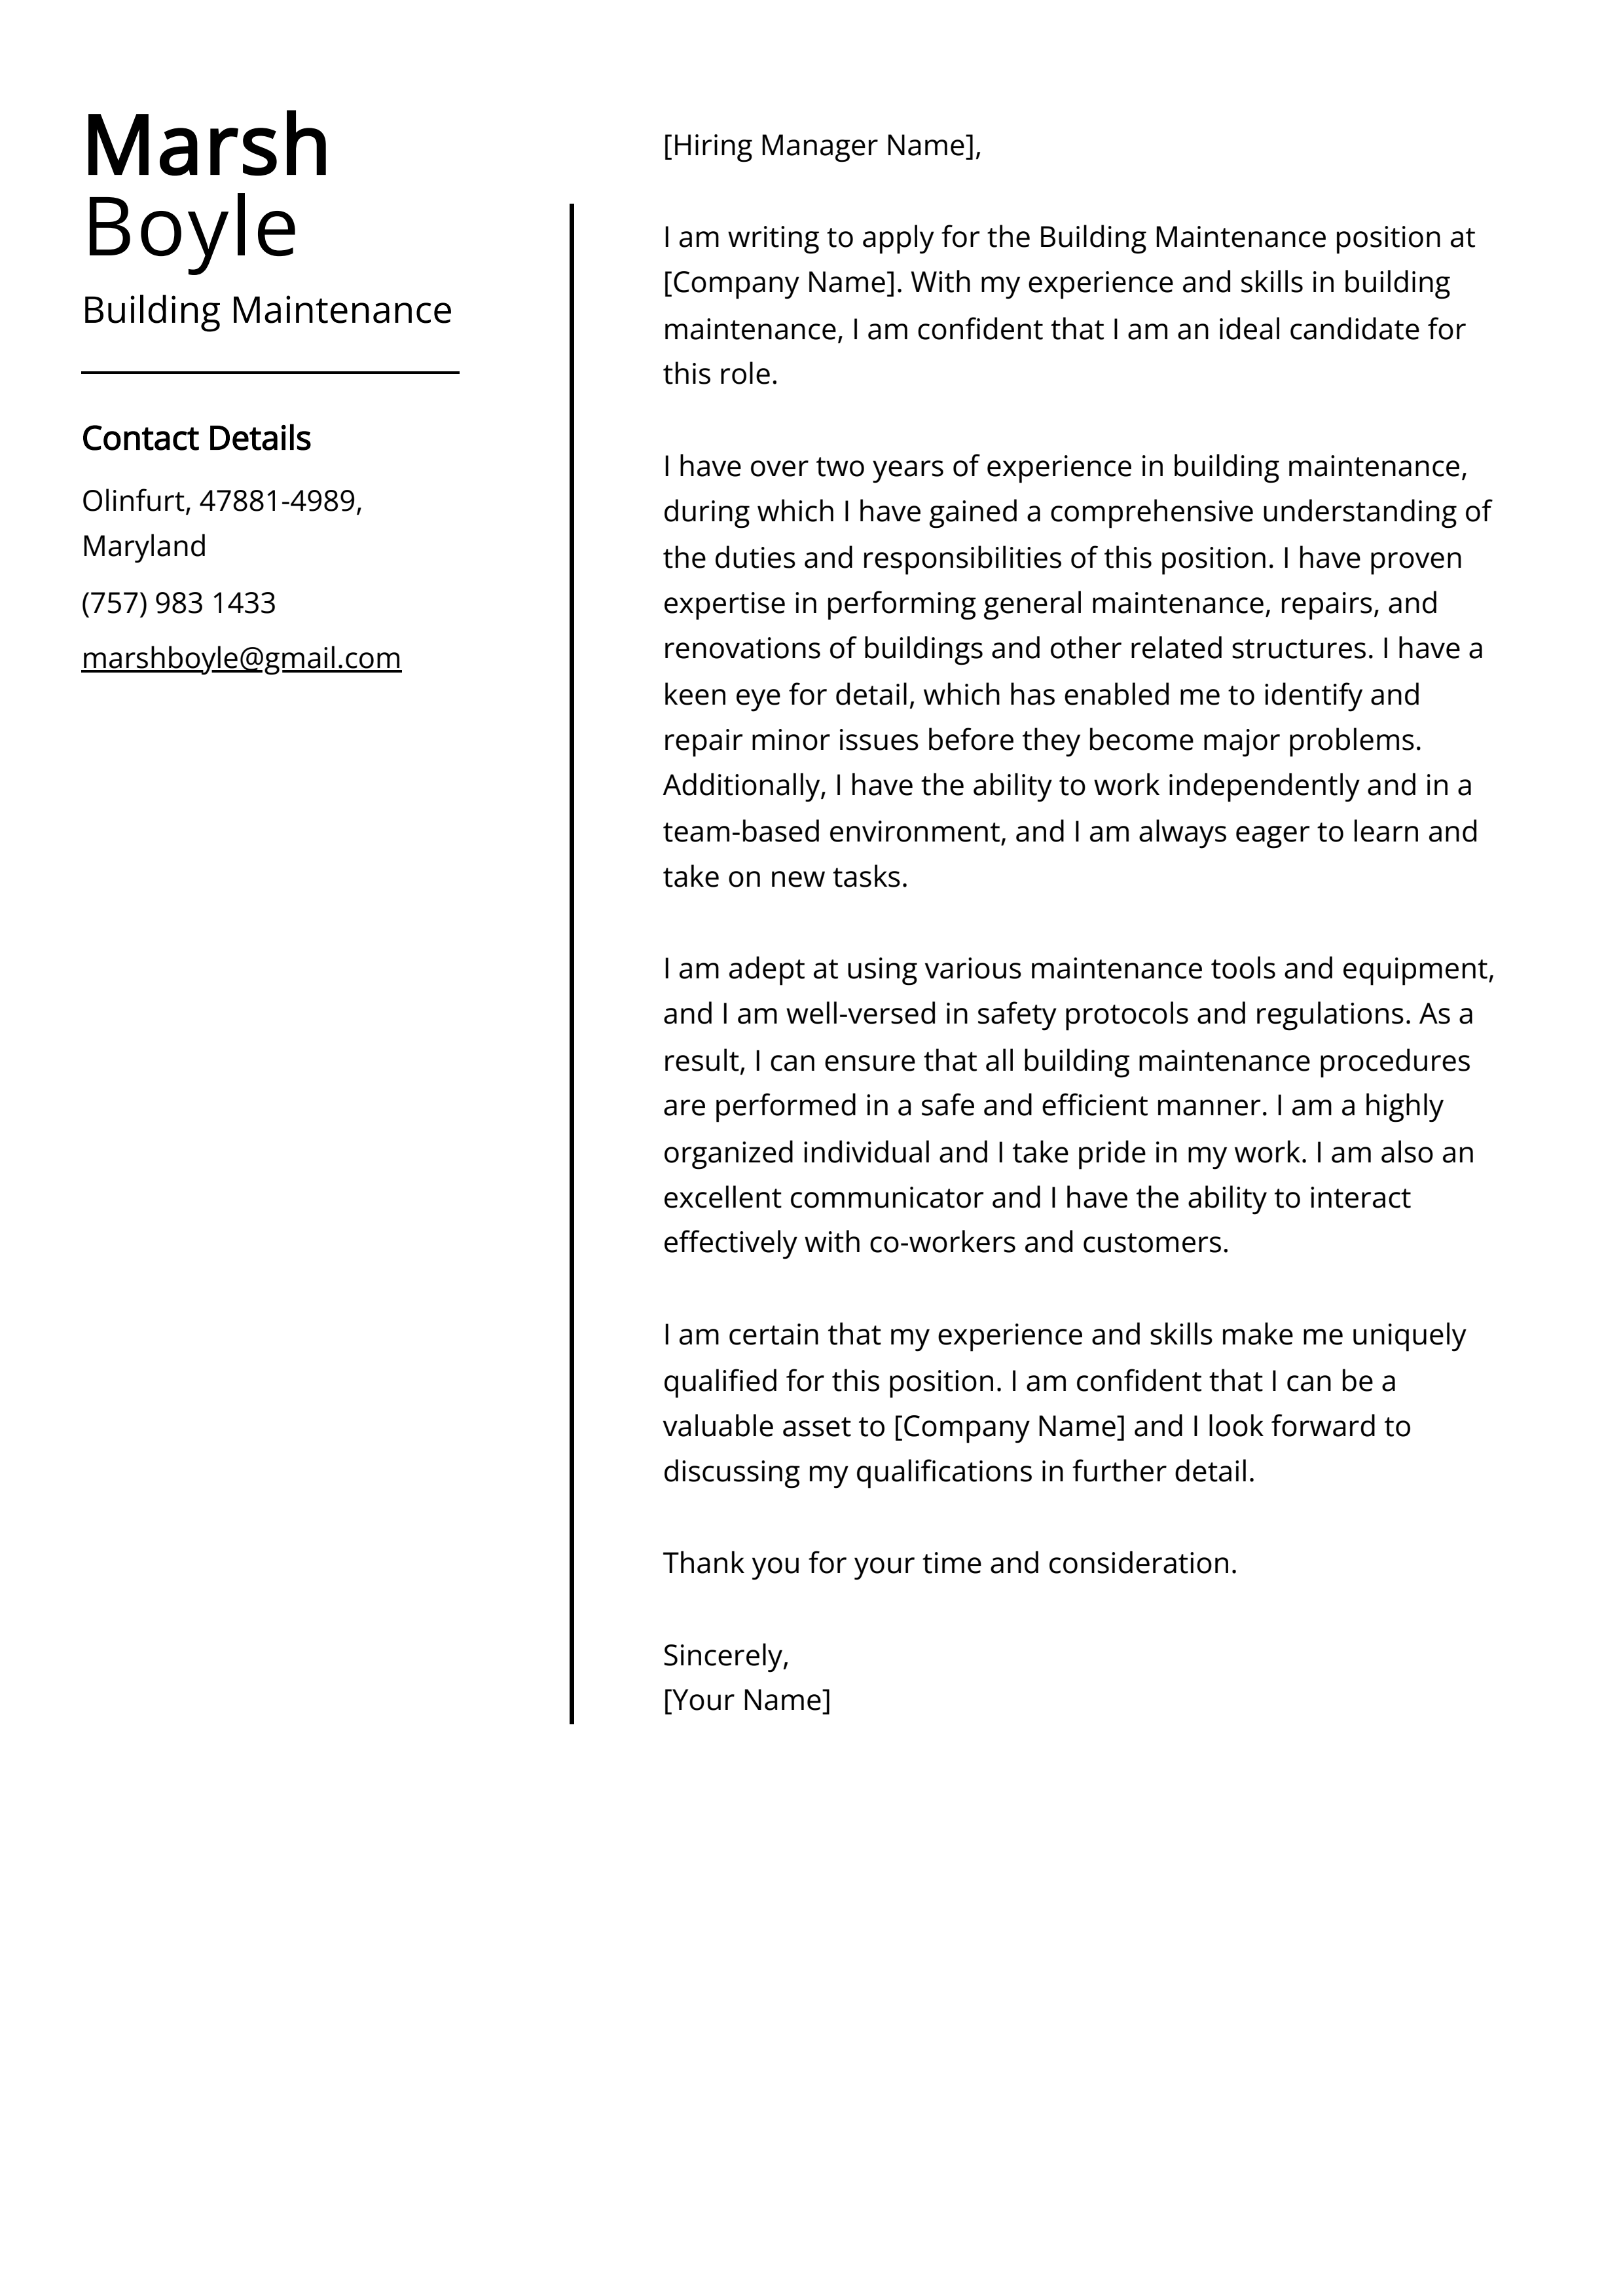 Building Maintenance Cover Letter Example